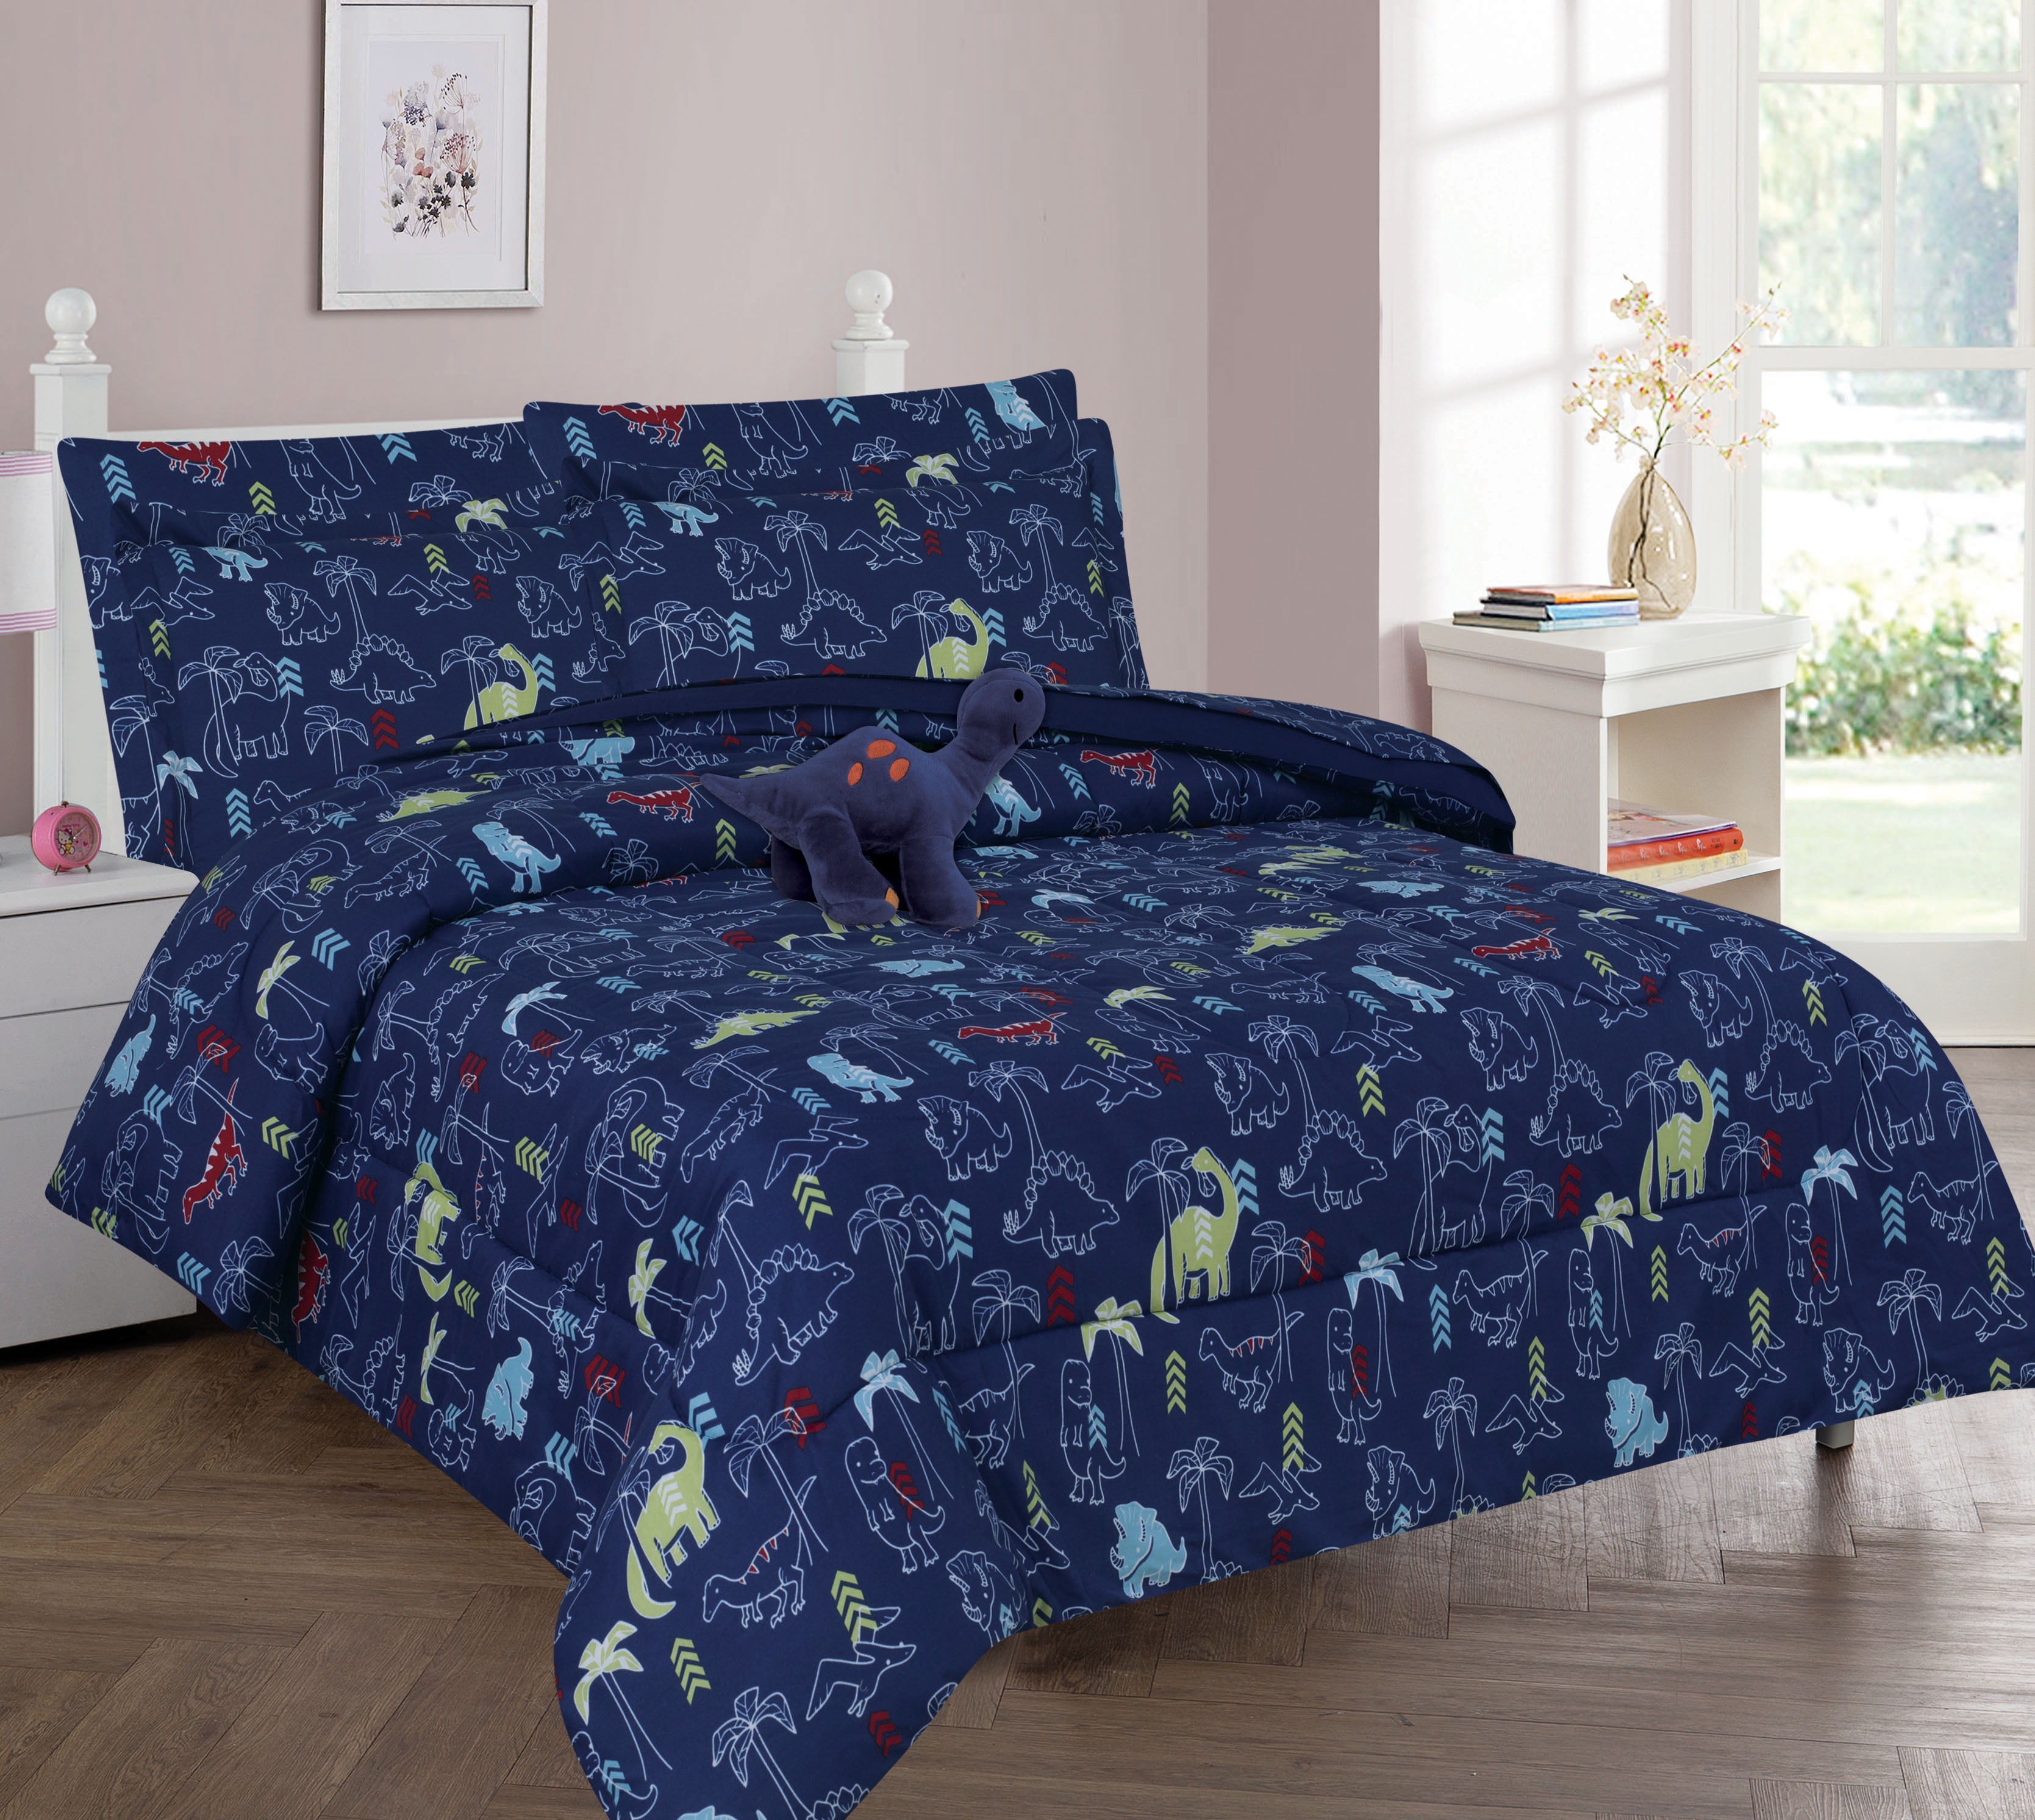 FULL DINOSAUR NAVY BOYS BEDDING SET, Beautiful Microfiber Comforter With  Furry Friend and Sheet Set (8 Piece Kids Bed In A Bag)